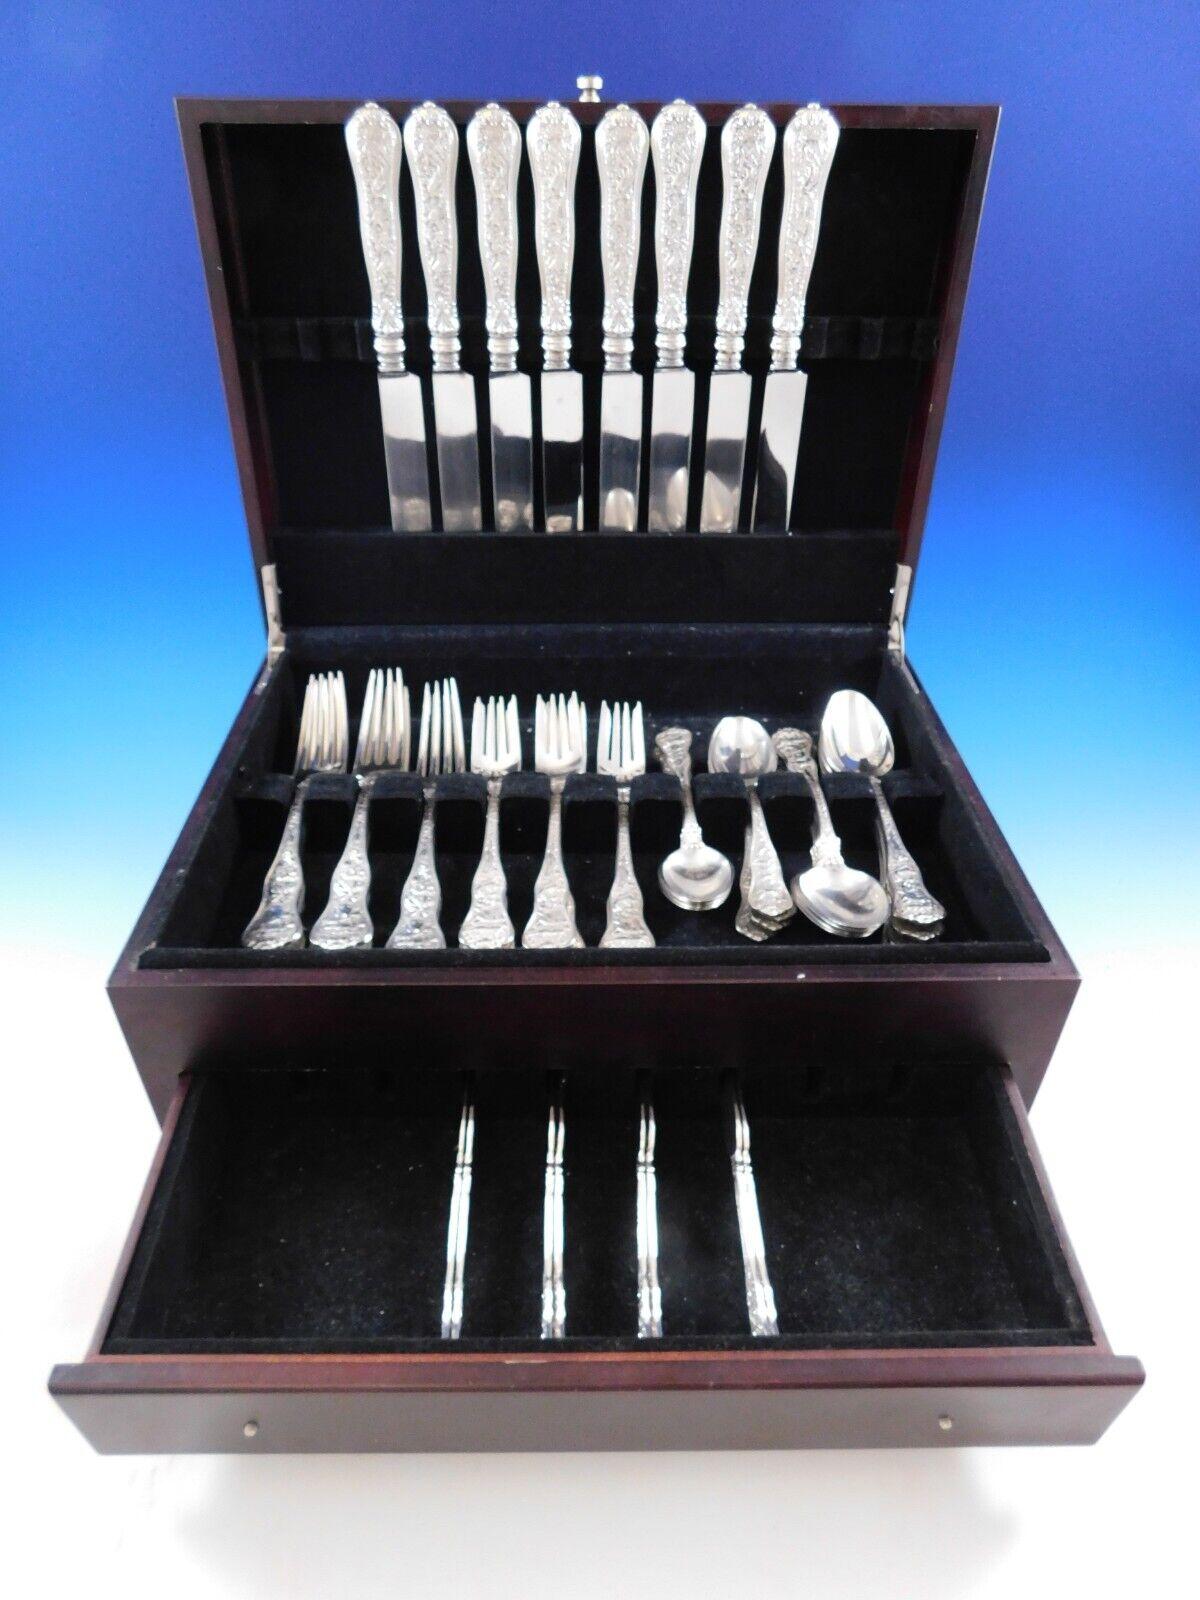 The Olympian pattern, which was introduced by Tiffany & Co. in 1878, is the most elaborate and complex of all Tiffany flatware designs. Each piece of Olympian is designed to illustrate a well-known story of Classical mythology. The subjects vary